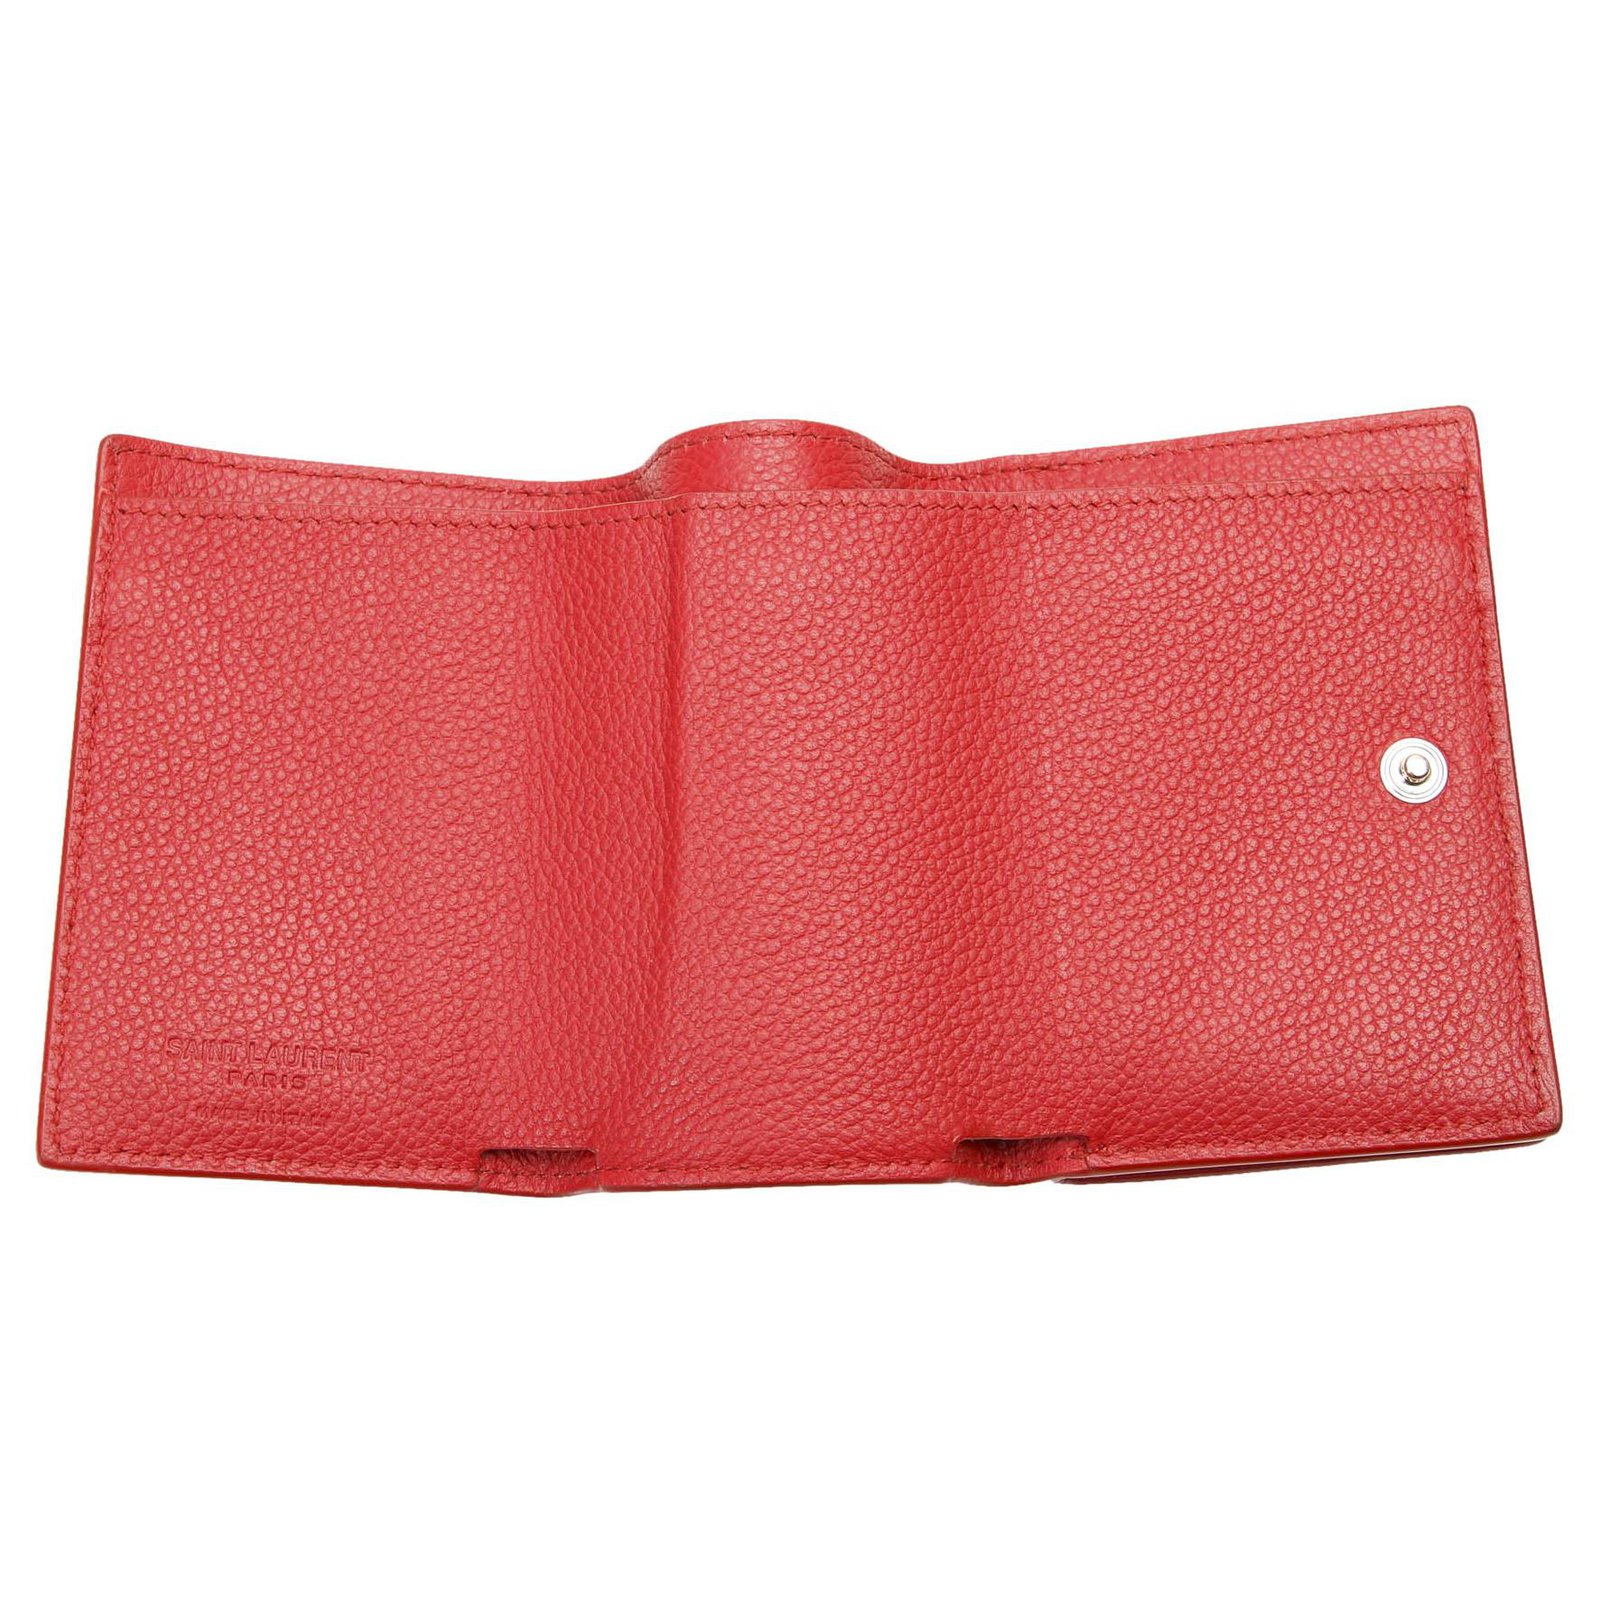 Yves Saint Laurent YSL Red Leather Small Wallet Pony-style calfskin ref ...